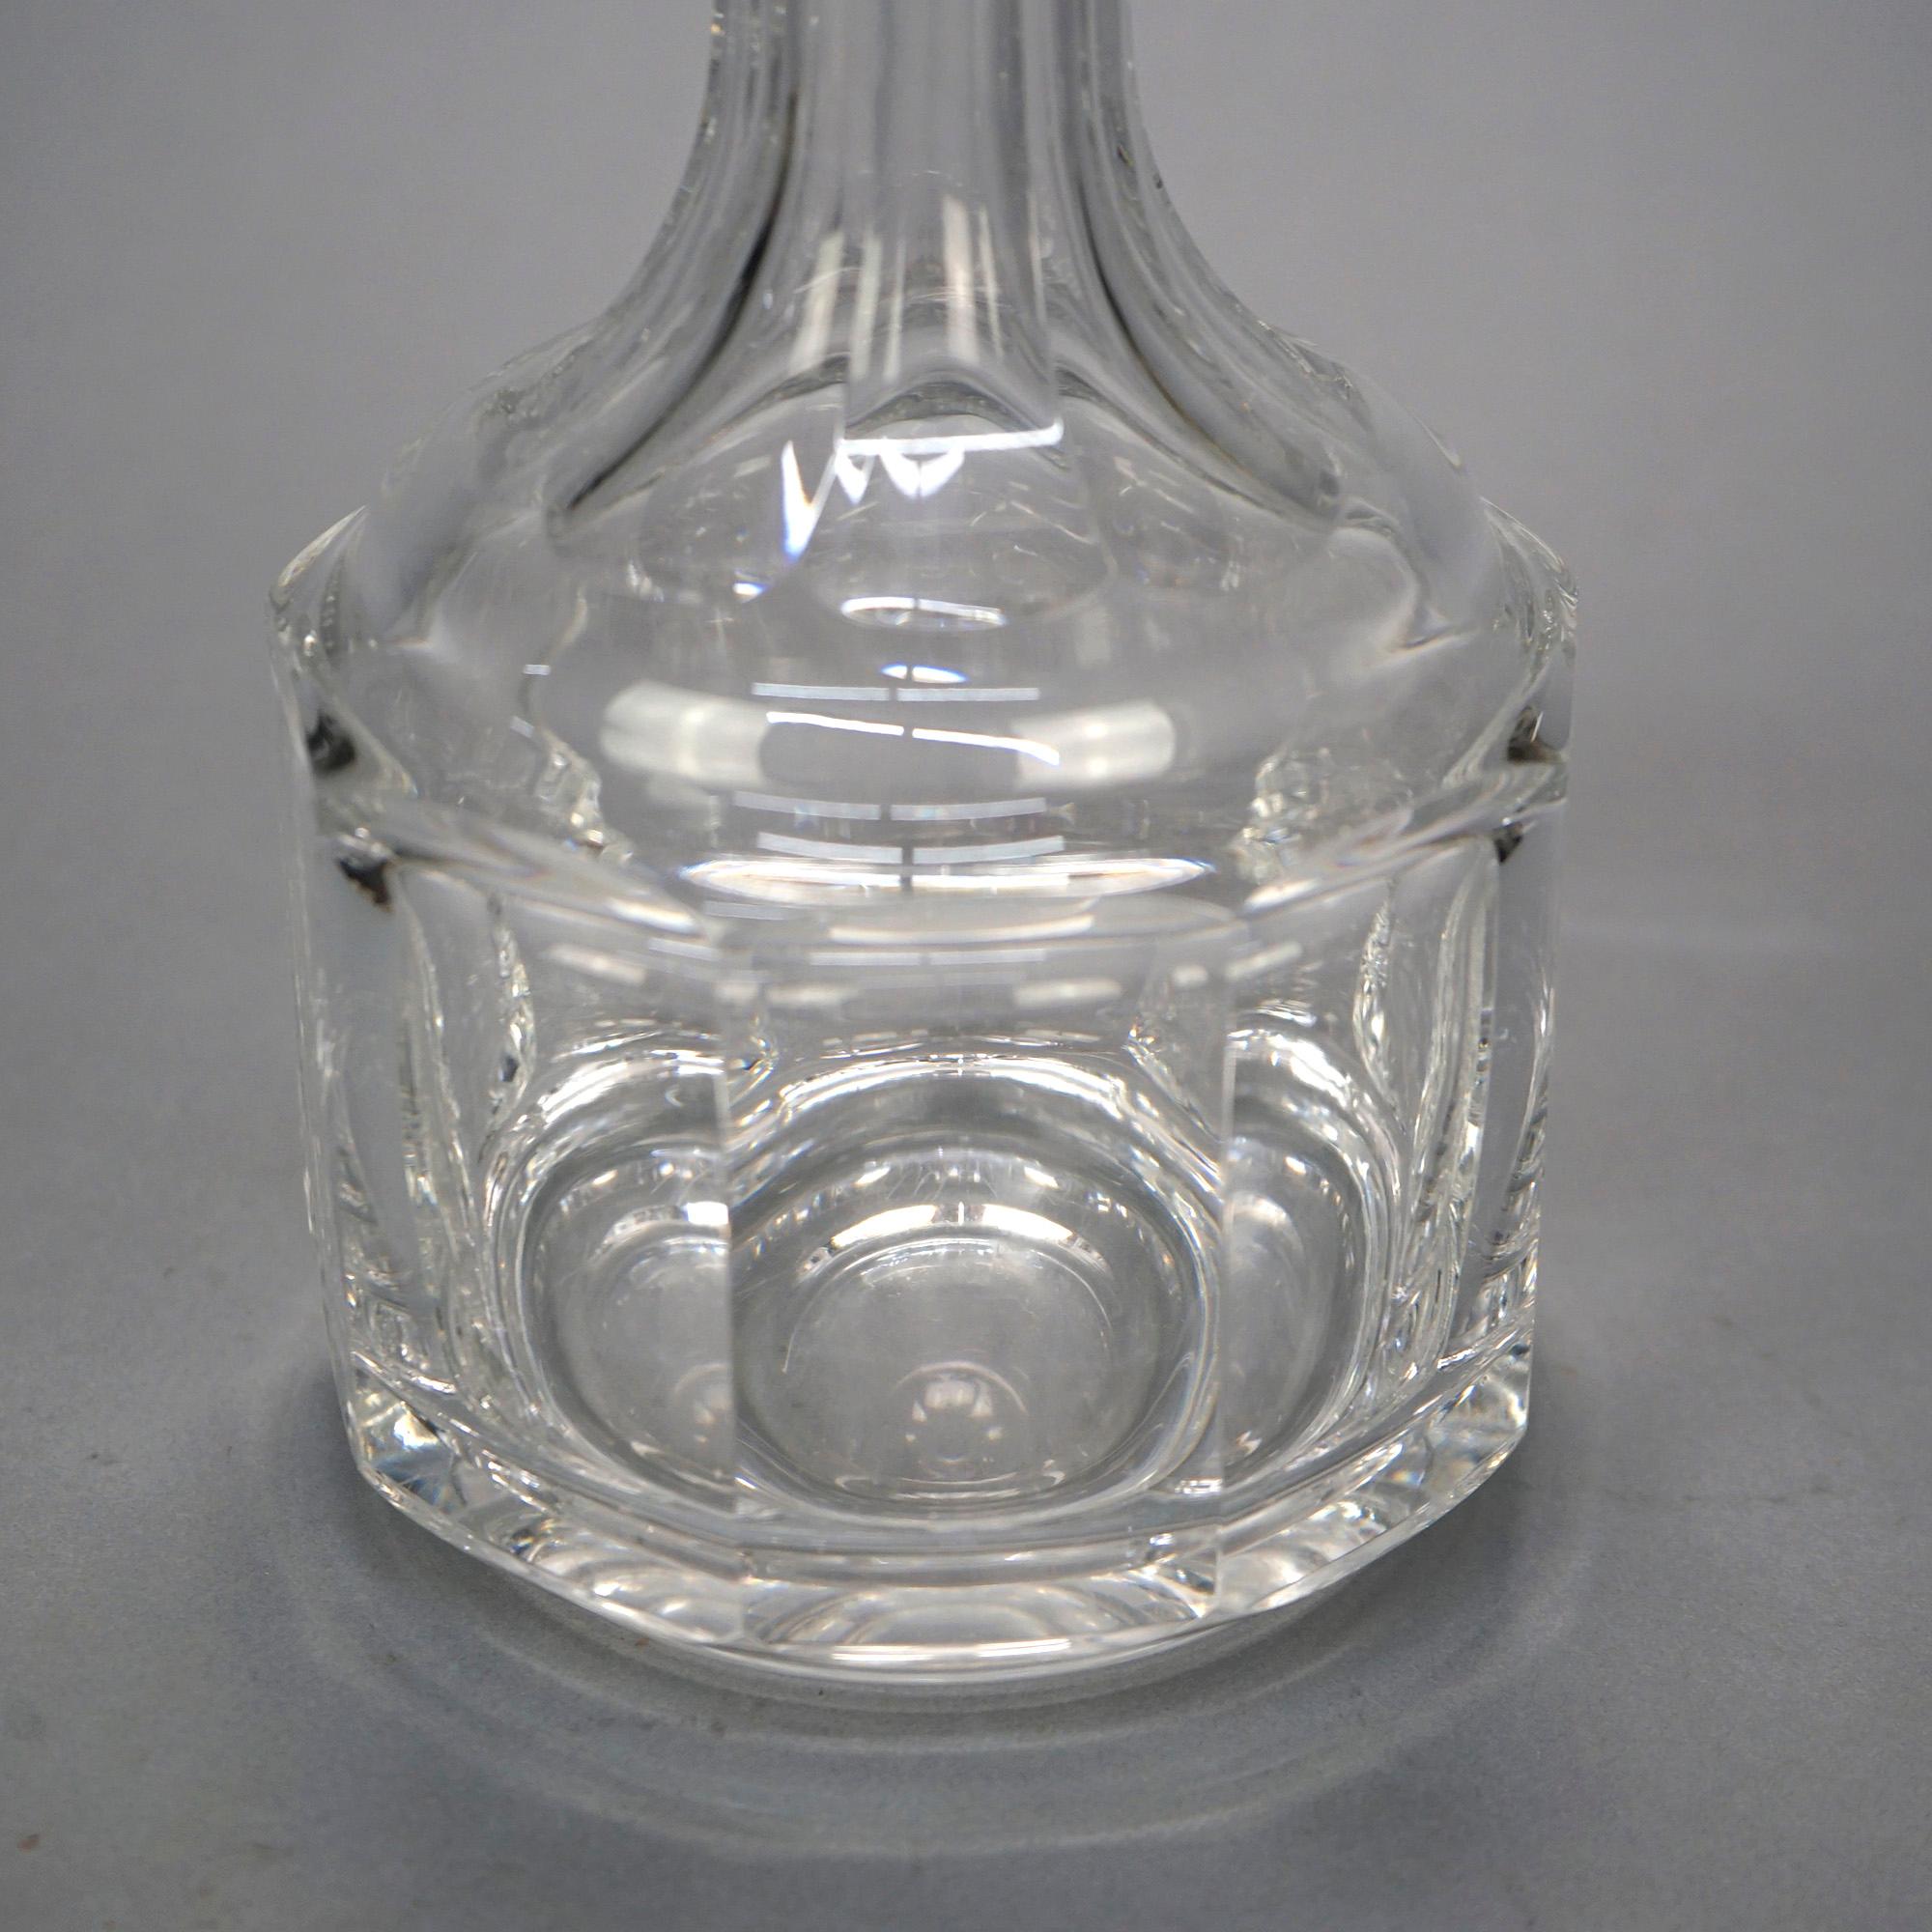 Kosta Boda Lead Crystal Spirits Decanter 20th C In Good Condition For Sale In Big Flats, NY